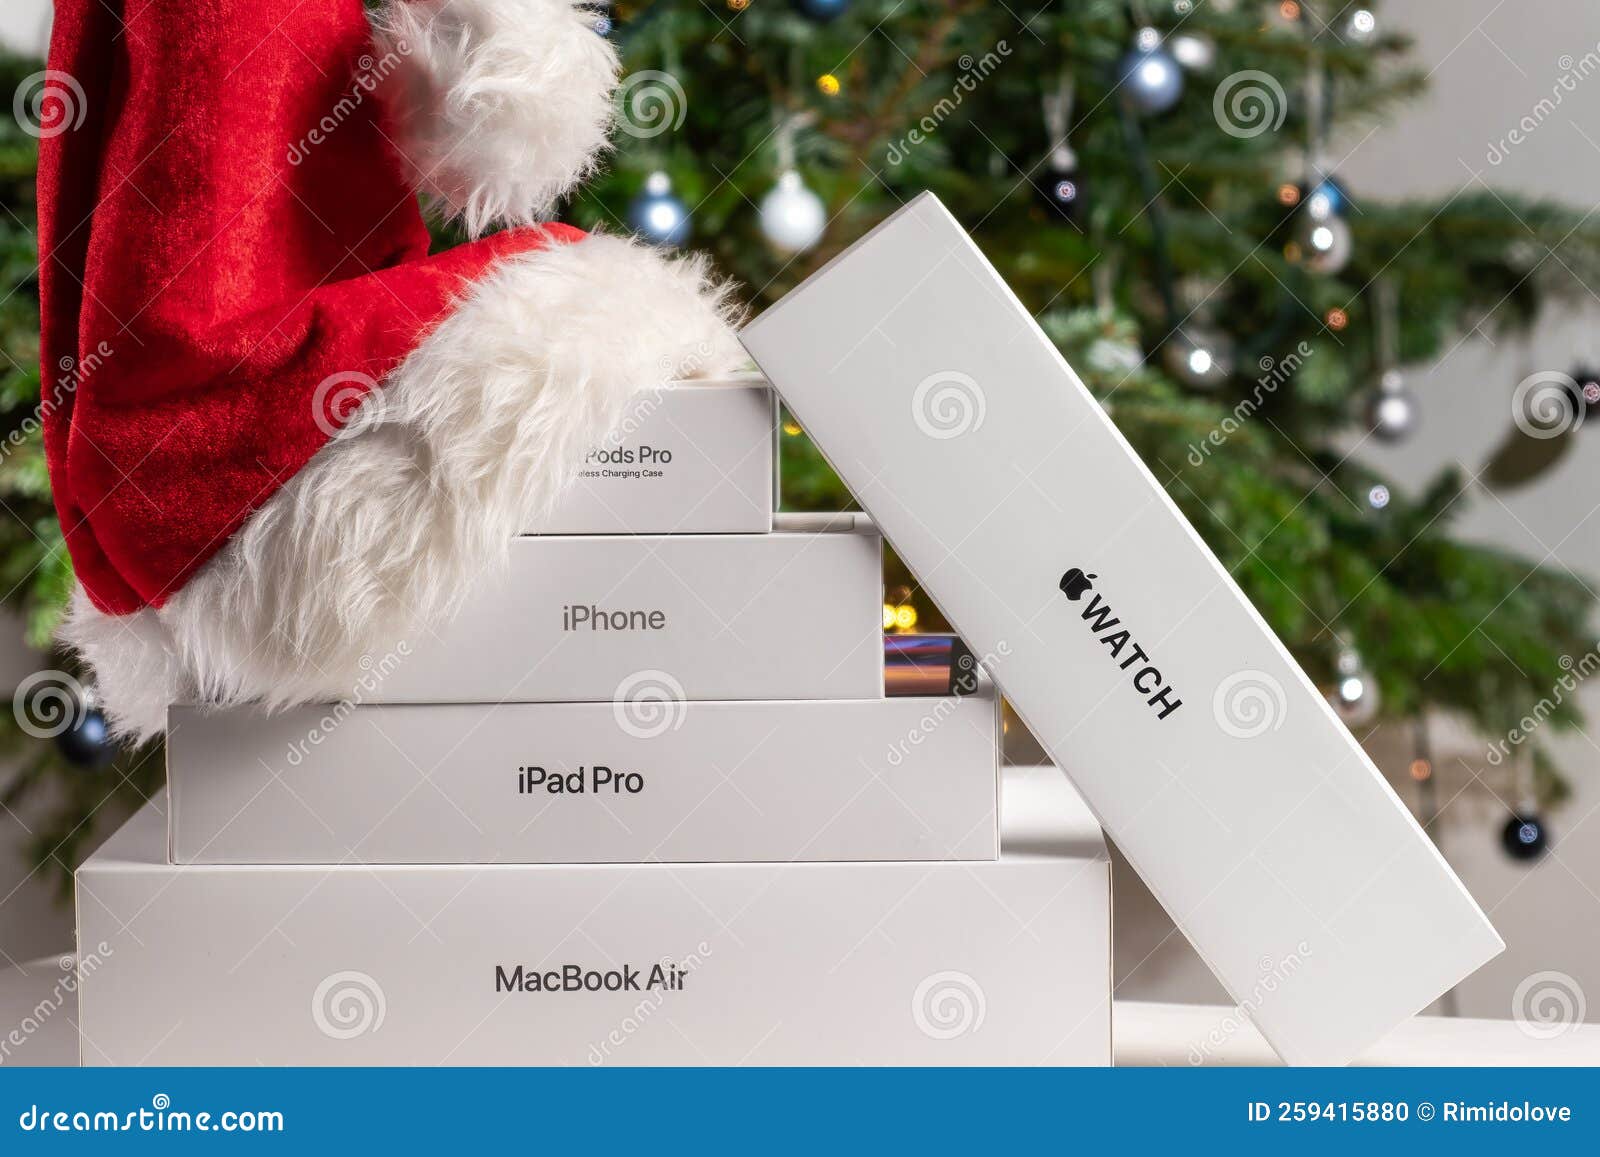 Iphone, Airpods Pro, Watch, IPad Pro Boxes with Santa Claus Hat and  Christmas Tree on the Background Editorial Image - Image of logo, gift:  259415880